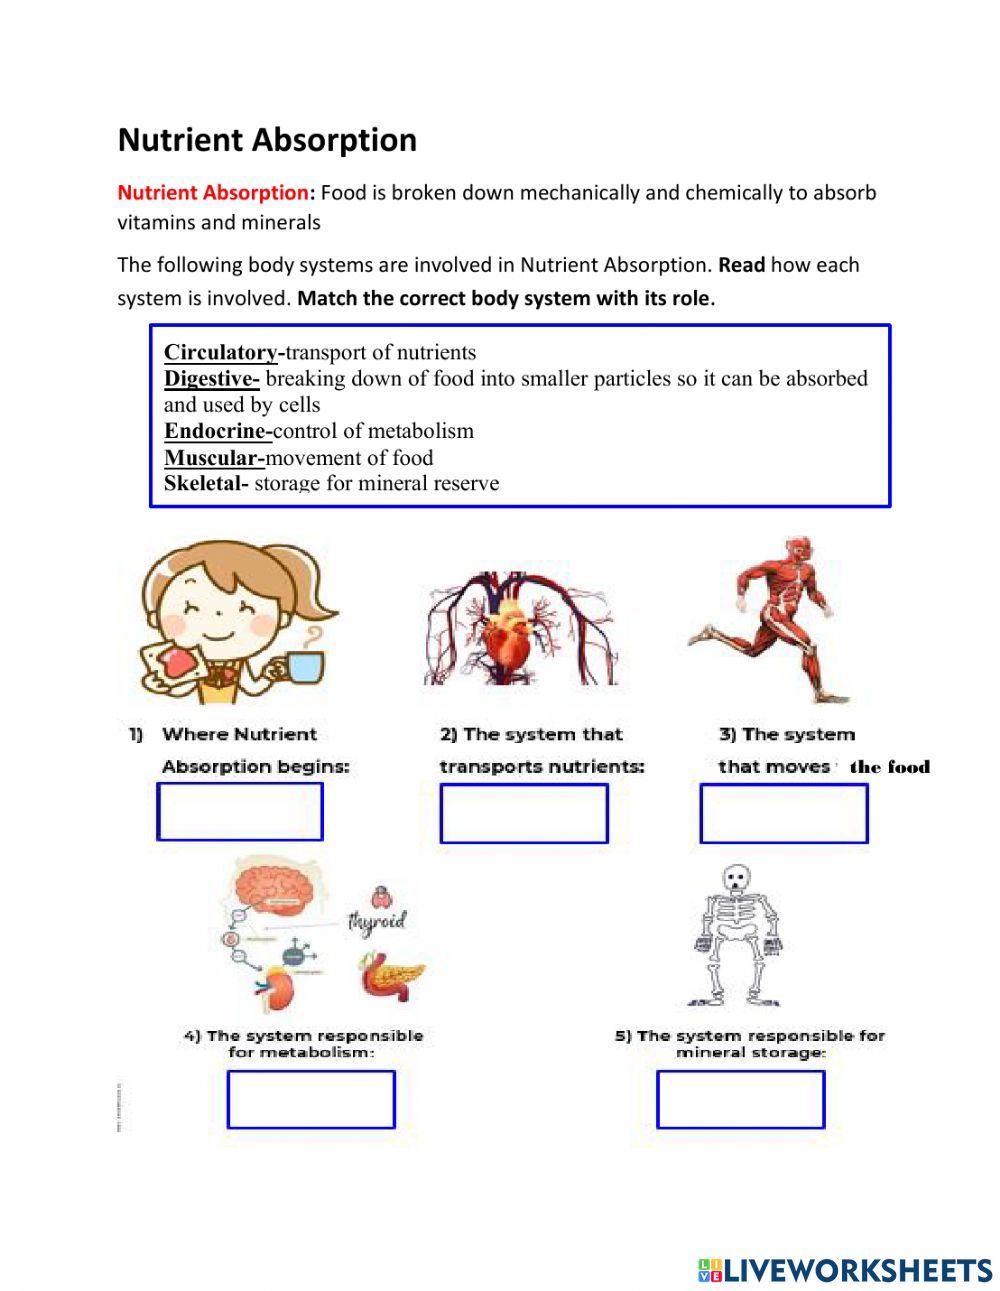 Body Systems: Regulation for Nutrient Absorption, Reproduction, and Defense from Injury-Illness